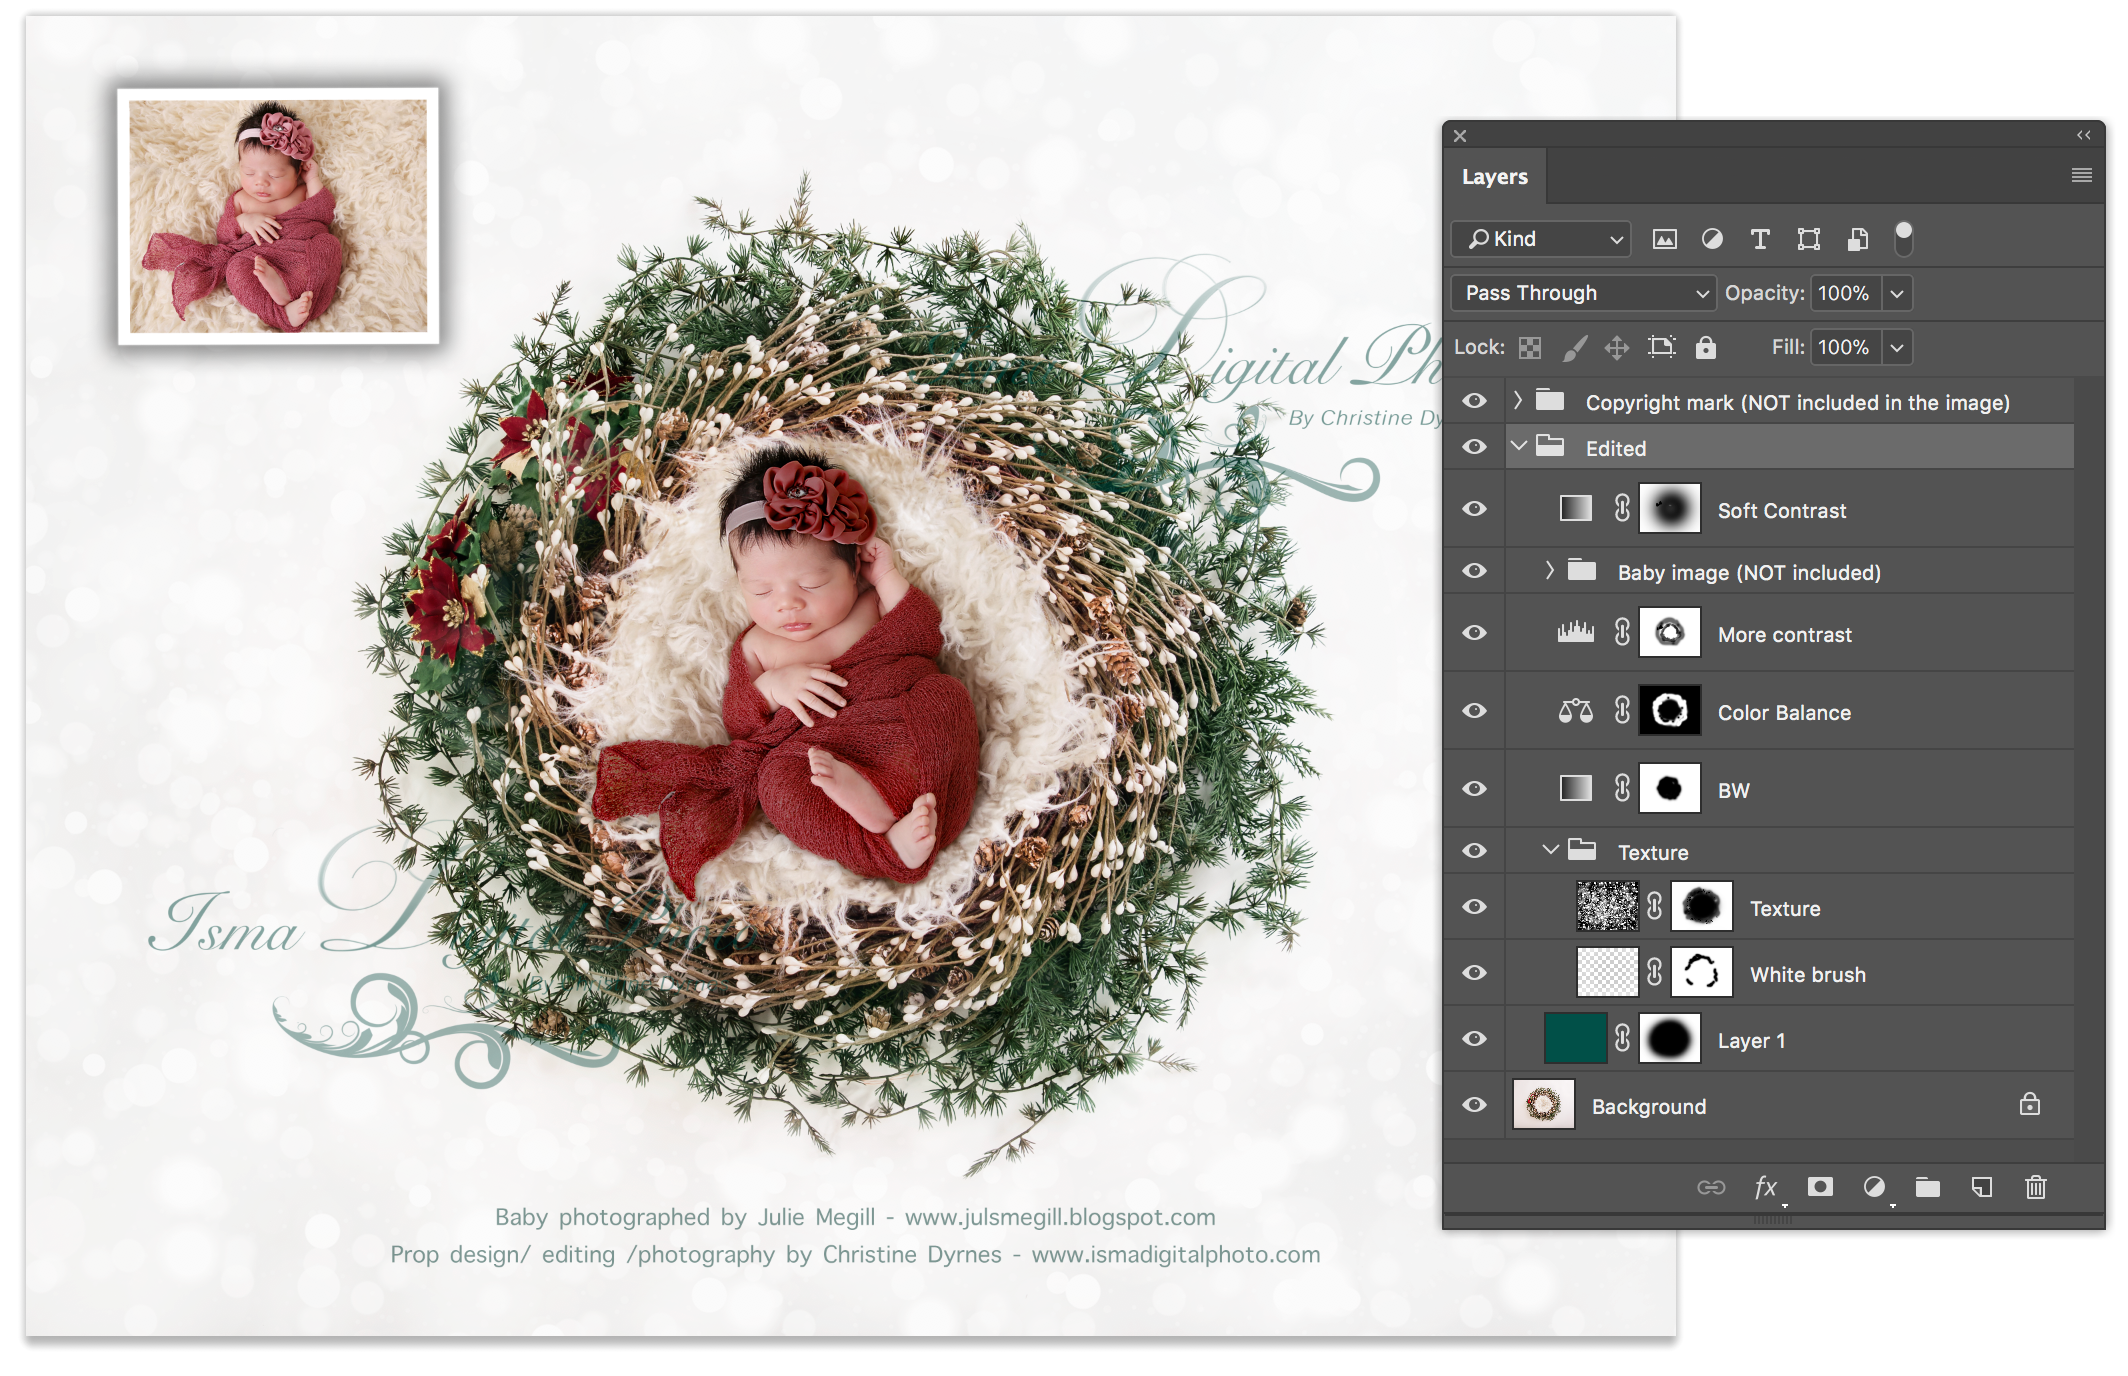 Christmas newborn wreath with texture  Digital Backdrop /Props for Newborn /baby photography - High resolution digital backdrop /background - two JPG and one PSD file with layers